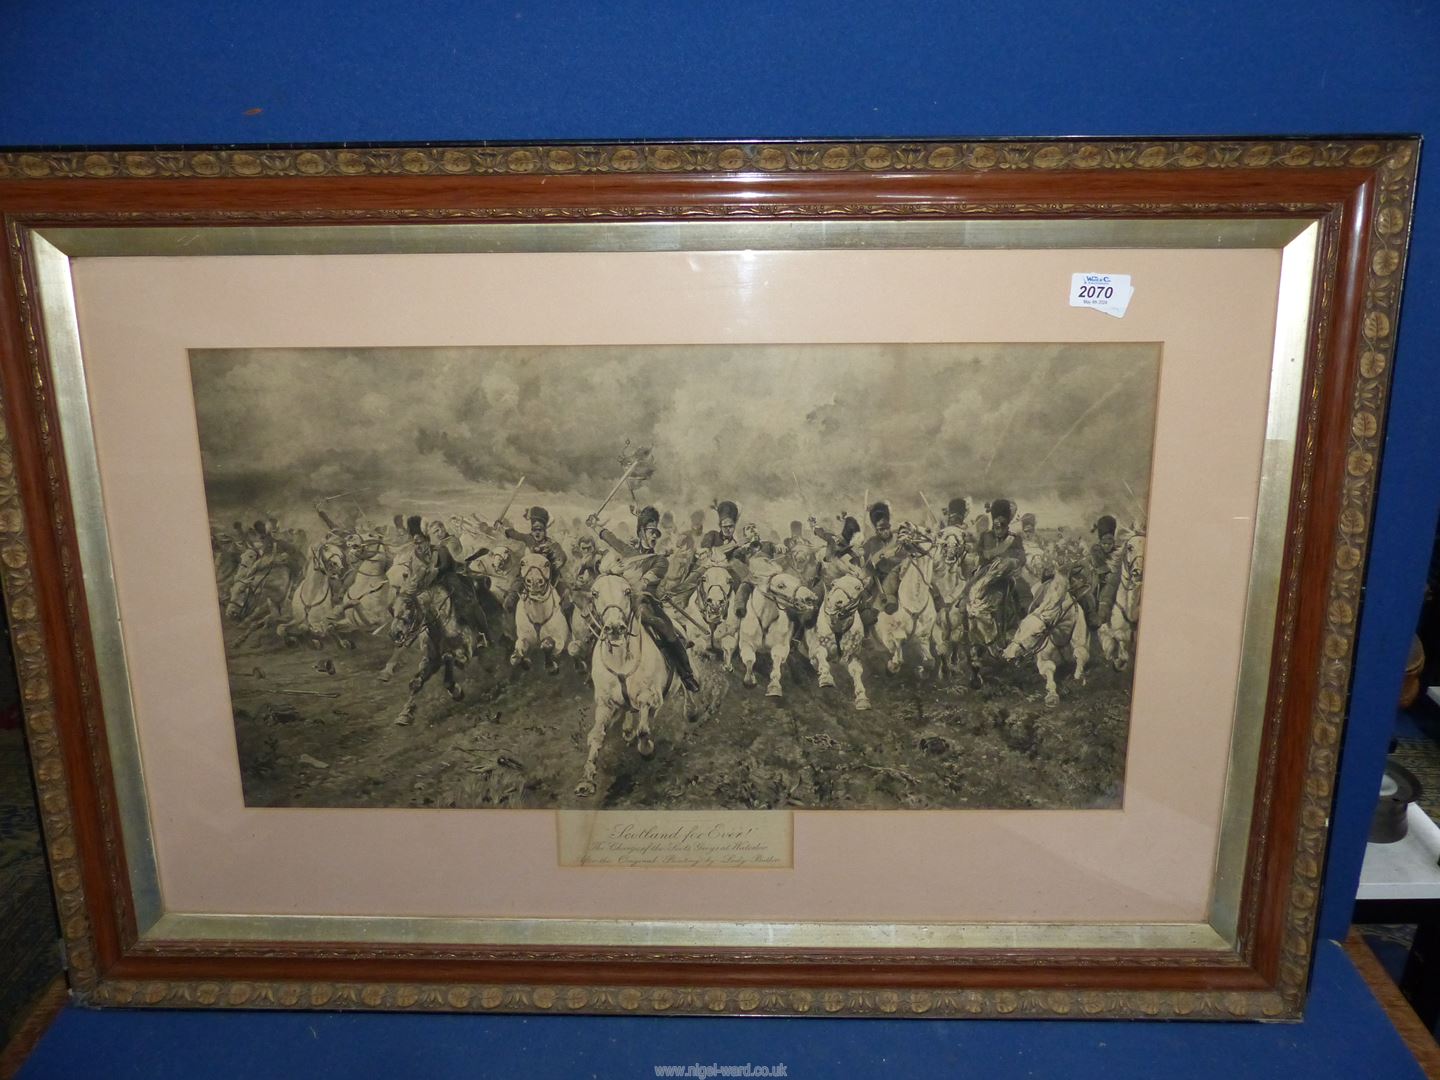 A large gilt framed Print titled 'Scotland Forever' the charge of the Scots Greys at Waterloo, - Image 3 of 3